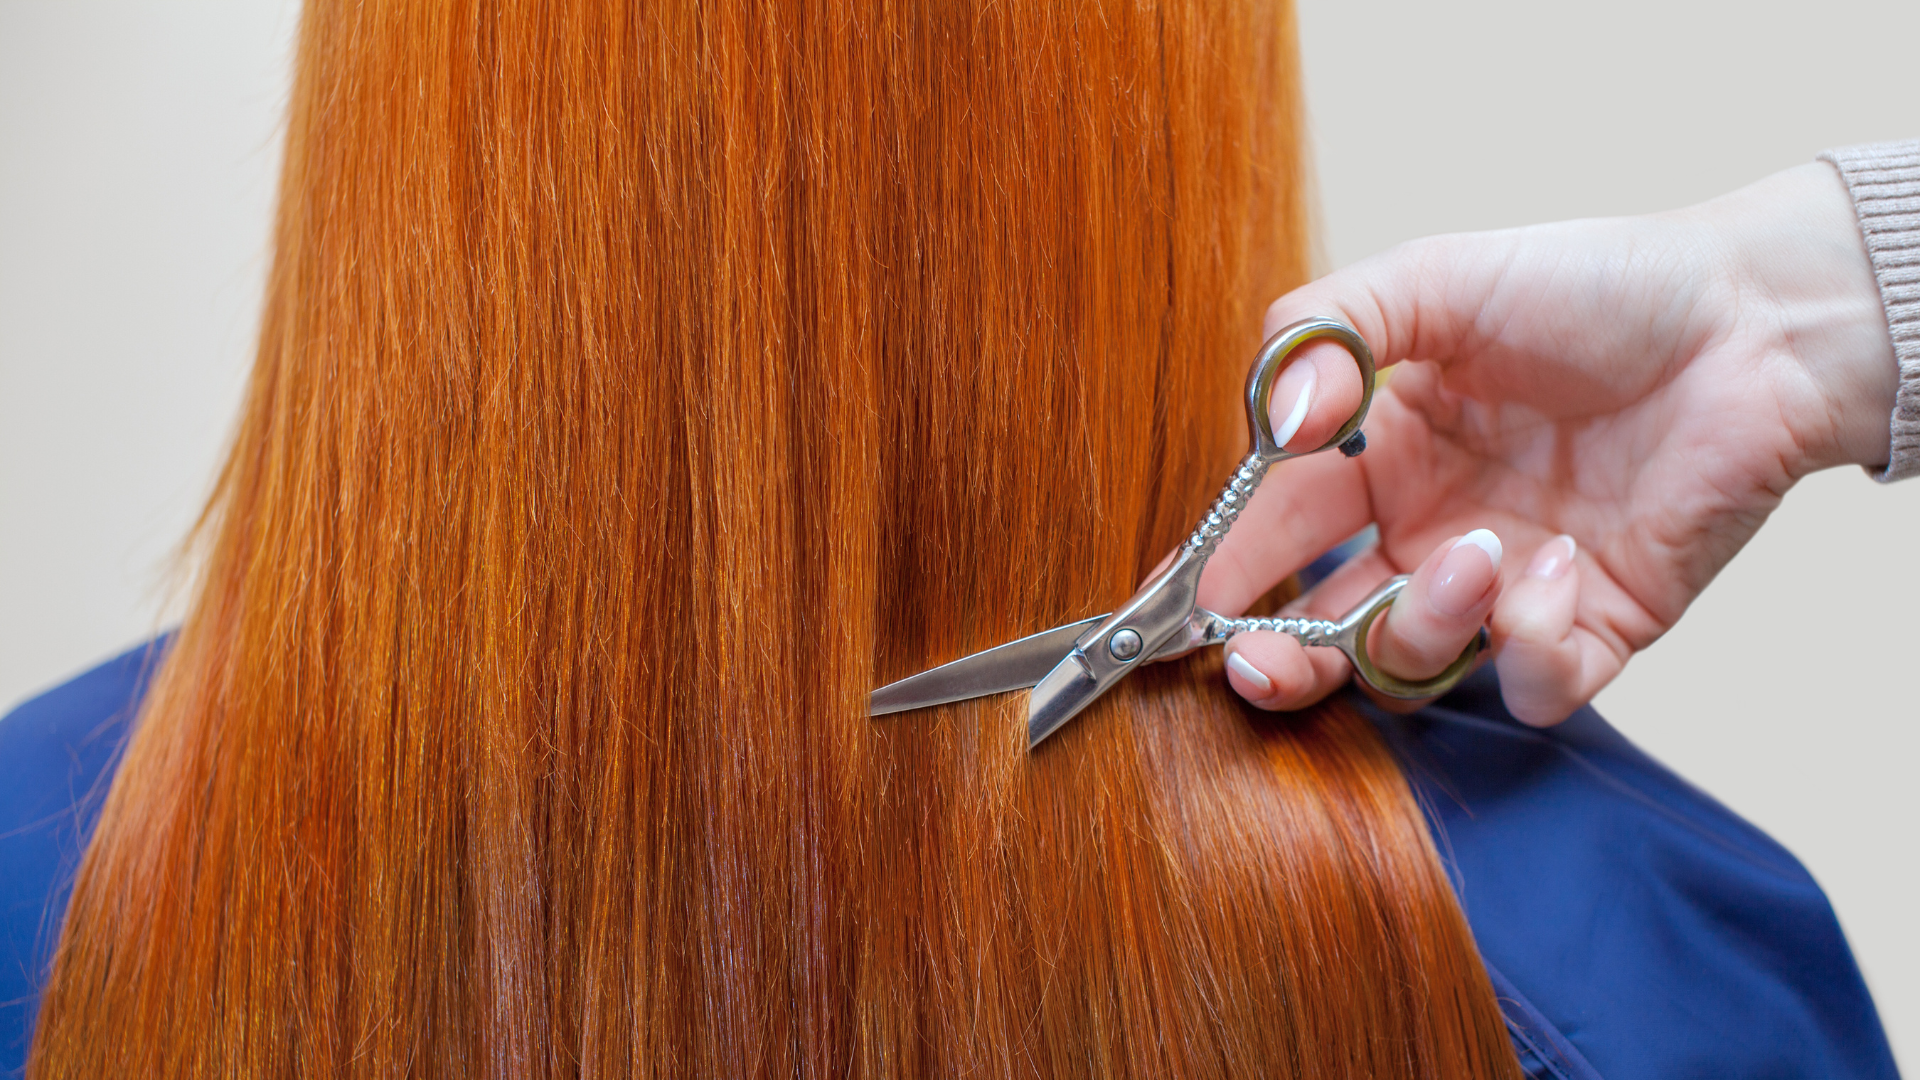 Is It A Good Idea To Get Your Red Hair Thinned? Here’s The Good + The Bad